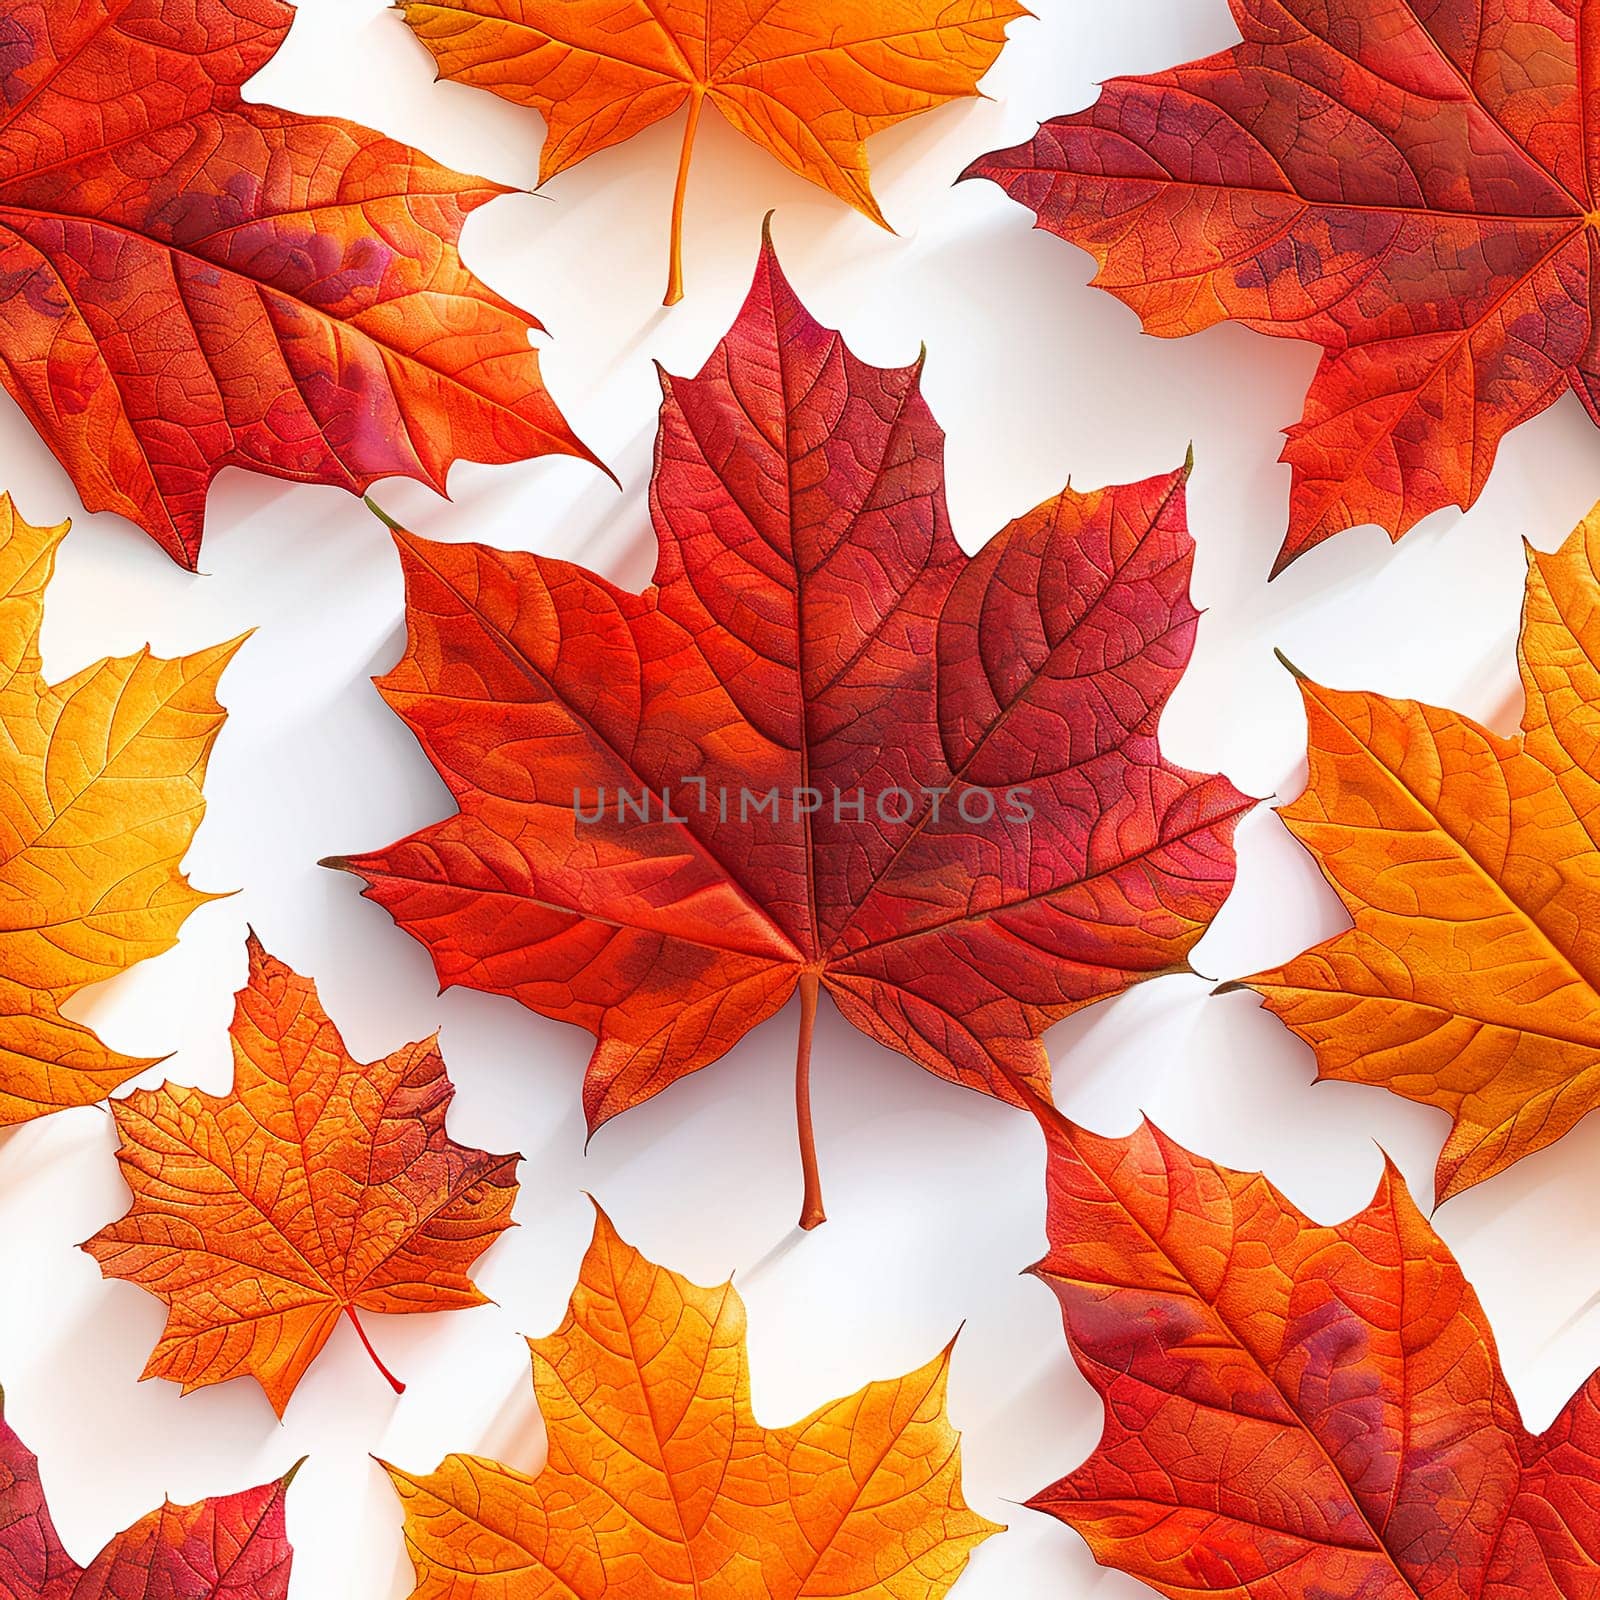 Seamless pattern of autumn leaves for backgrounds or wallpaper designs